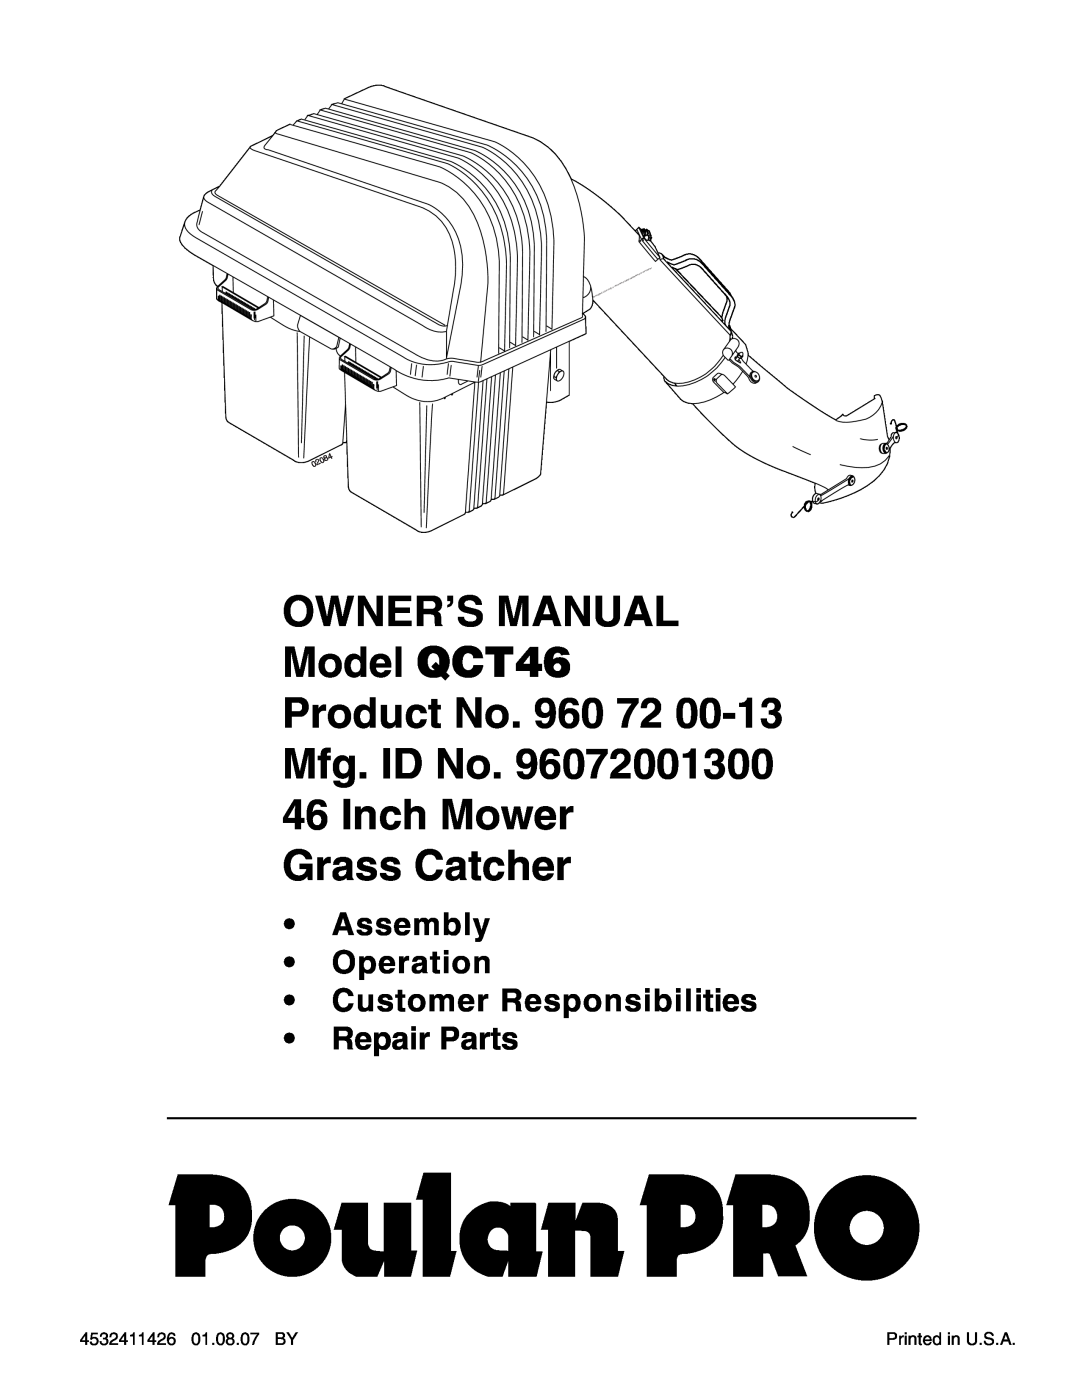 Poulan 960 72 00-13 owner manual Mfg. ID No. 46 Inch Mower Grass Catcher, Assembly Operation Customer Responsibilities 